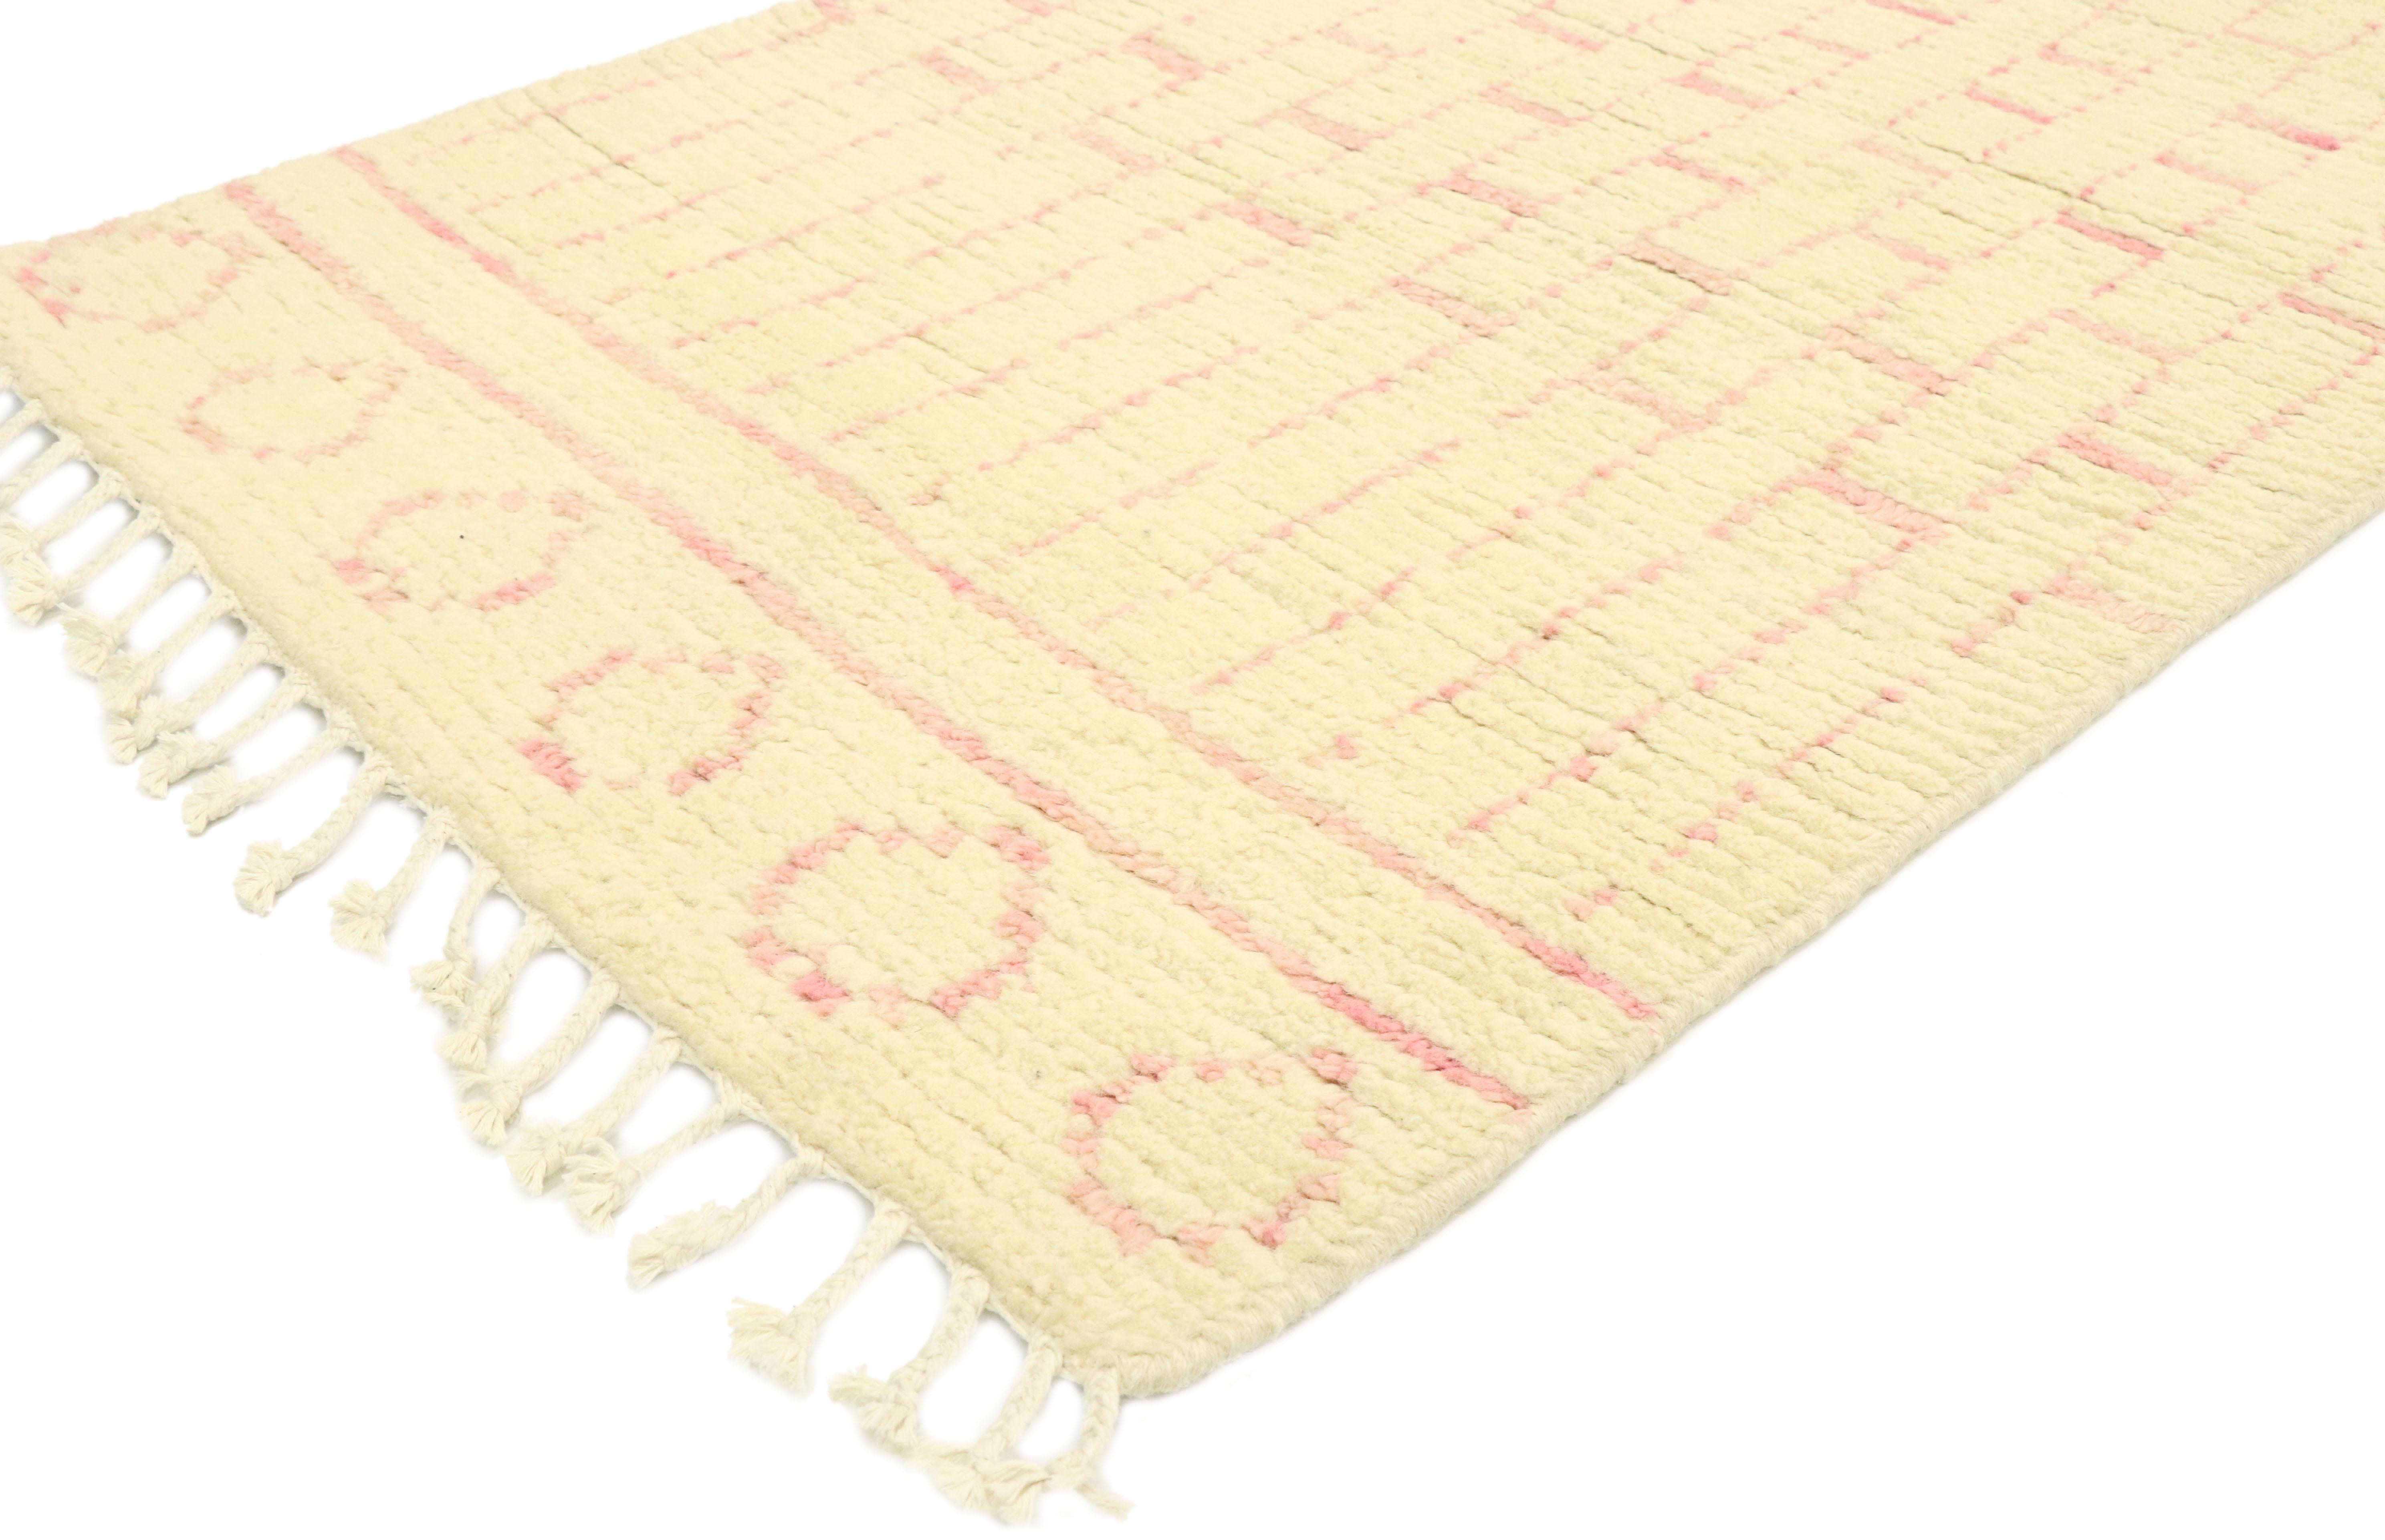 80606, new contemporary Moroccan Shag Hallway Runner with boho chic style. With its Hygge vibes, cozy contentment and plush pile, this hand knotted wool contemporary Moroccan shag hallway runner adds texture and subtle graphic appeal forming a warm,